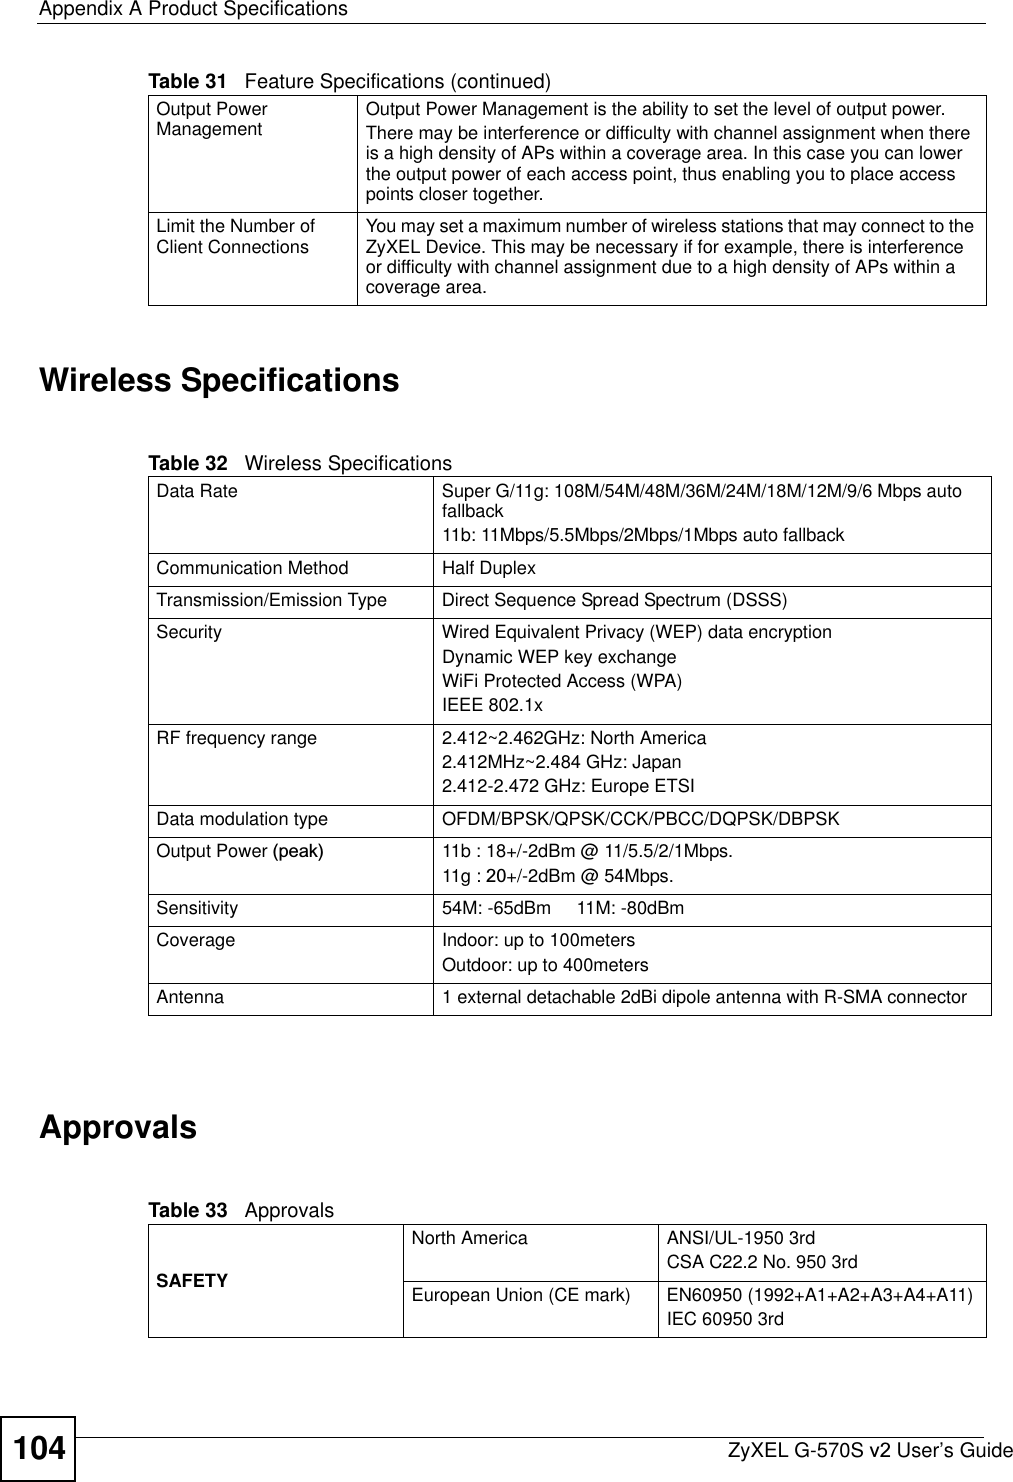 Appendix A Product SpecificationsZyXEL G-570S v2 User’s Guide104Wireless SpecificationsApprovalsOutput Power Management Output Power Management is the ability to set the level of output power.There may be interference or difficulty with channel assignment when there is a high density of APs within a coverage area. In this case you can lower the output power of each access point, thus enabling you to place access points closer together.Limit the Number of Client Connections You may set a maximum number of wireless stations that may connect to the ZyXEL Device. This may be necessary if for example, there is interference or difficulty with channel assignment due to a high density of APs within a coverage area. Table 31   Feature Specifications (continued)Table 32   Wireless SpecificationsData Rate Super G/11g: 108M/54M/48M/36M/24M/18M/12M/9/6 Mbps auto fallback 11b: 11Mbps/5.5Mbps/2Mbps/1Mbps auto fallbackCommunication Method Half DuplexTransmission/Emission Type Direct Sequence Spread Spectrum (DSSS)Security Wired Equivalent Privacy (WEP) data encryptionDynamic WEP key exchangeWiFi Protected Access (WPA)IEEE 802.1xRF frequency range 2.412~2.462GHz: North America2.412MHz~2.484 GHz: Japan2.412-2.472 GHz: Europe ETSIData modulation type OFDM/BPSK/QPSK/CCK/PBCC/DQPSK/DBPSKOutput Power (peak) 11b : 18+/-2dBm @ 11/5.5/2/1Mbps.11g : 20+/-2dBm @ 54Mbps.Sensitivity 54M: -65dBm     11M: -80dBm Coverage Indoor: up to 100meters           Outdoor: up to 400metersAntenna 1 external detachable 2dBi dipole antenna with R-SMA connectorTable 33   ApprovalsSAFETYNorth America ANSI/UL-1950 3rdCSA C22.2 No. 950 3rdEuropean Union (CE mark) EN60950 (1992+A1+A2+A3+A4+A11)IEC 60950 3rd